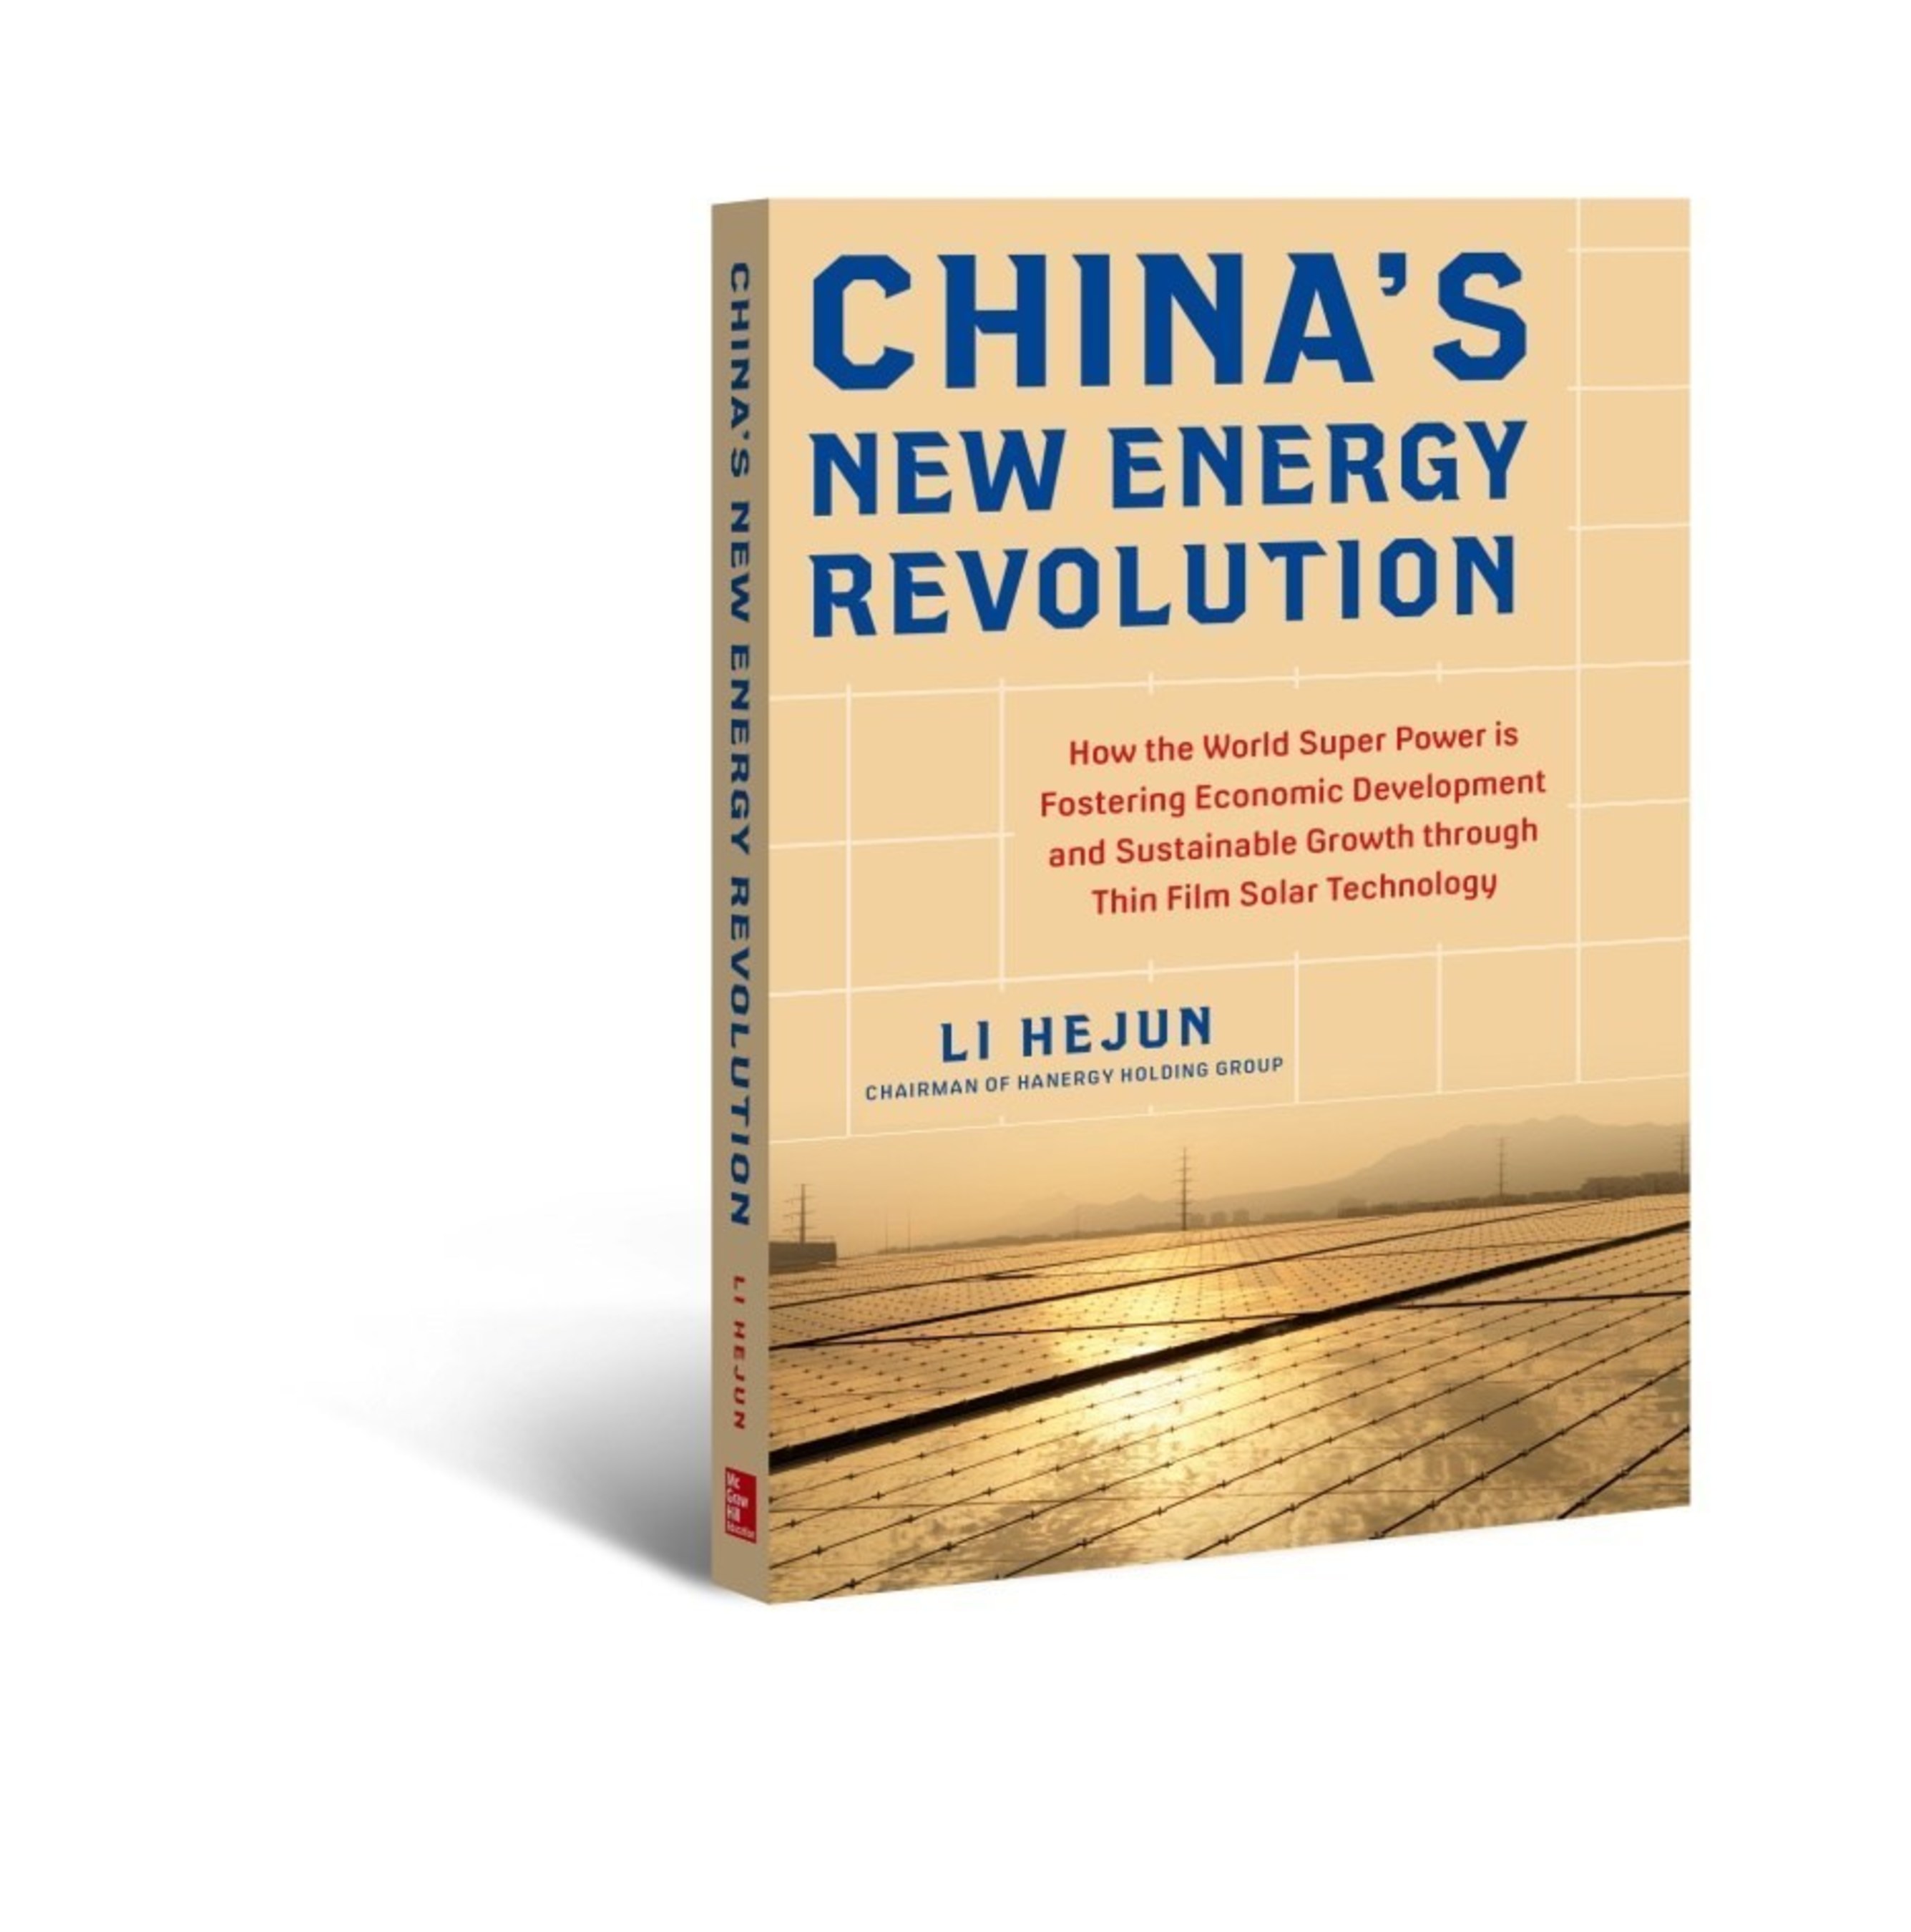 The English edition of China's New Energy Revolution by renewable energy advocate and Hanergy Chairman Li Hejun is now available for purchase in bookstores across the U.S. as well as in e-book format.